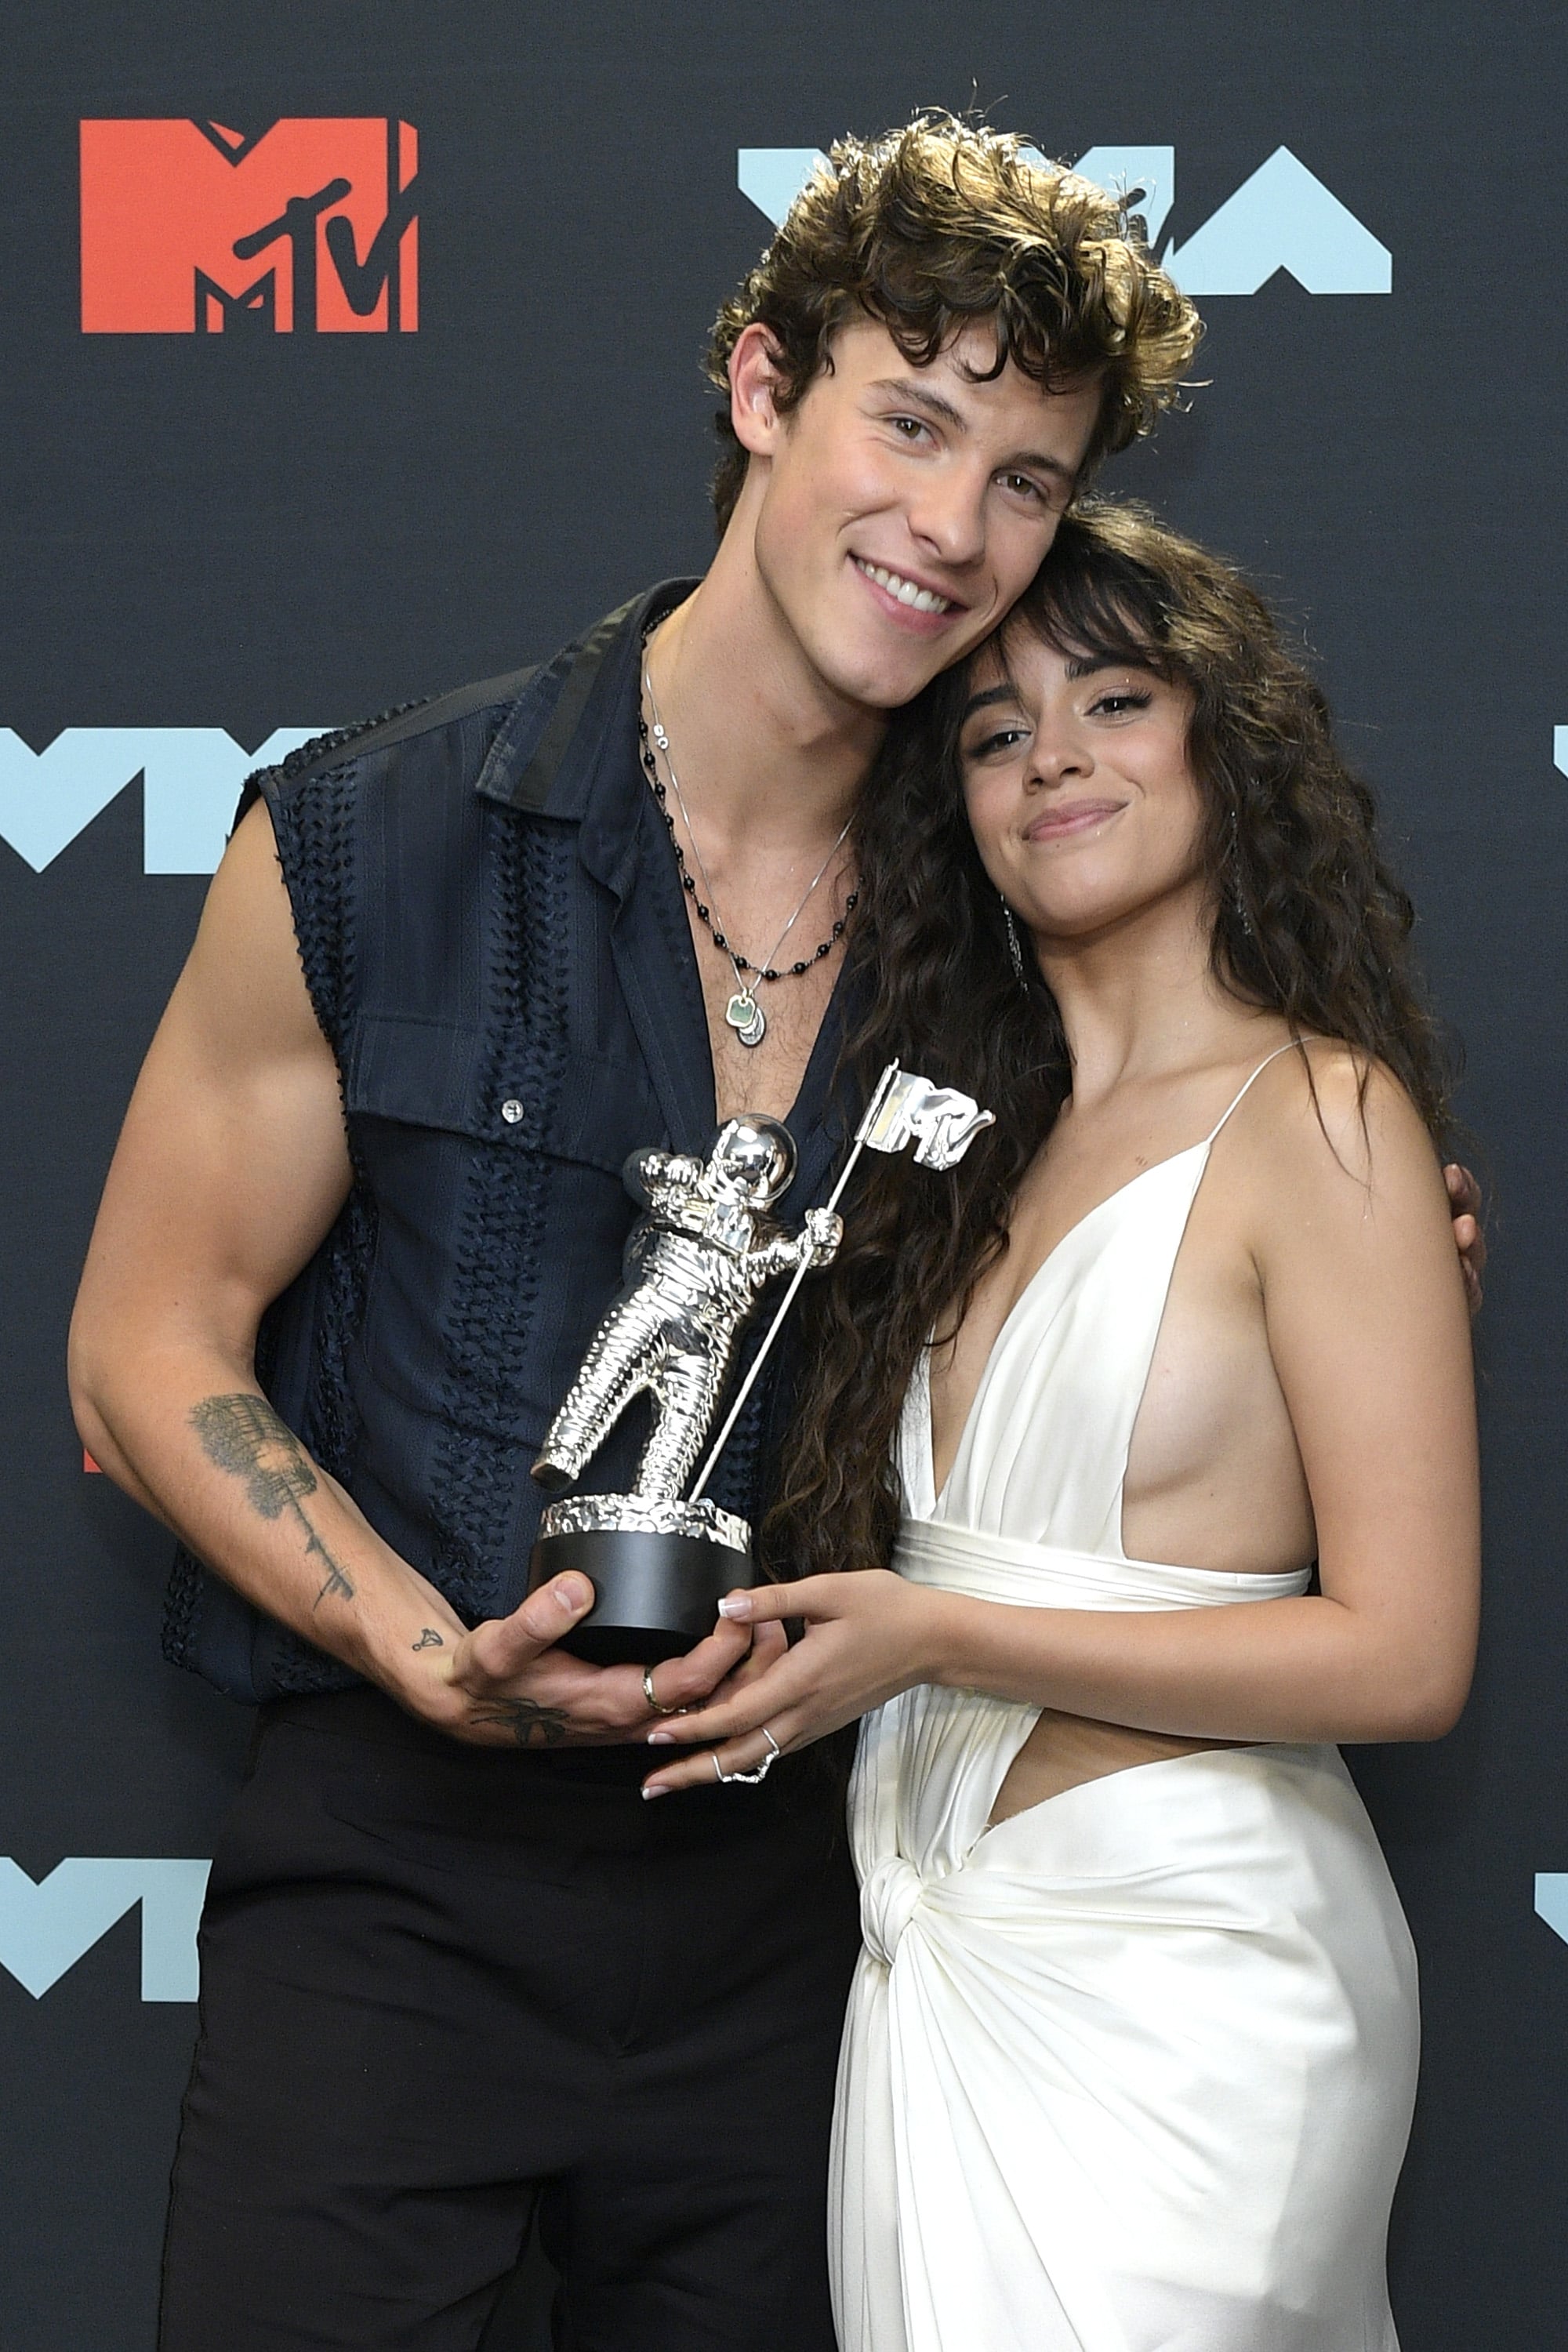 NEWARK, NEW JERSEY - AUGUST 26: Shawn Mendes and Camila Cabello pose with the Best Collaboration Award in the Press Room during the 2019 MTV Video Music Awards at Prudential Center on August 26, 2019 in Newark, New Jersey. (Photo by Roy Rochlin/Getty Images for MTV)